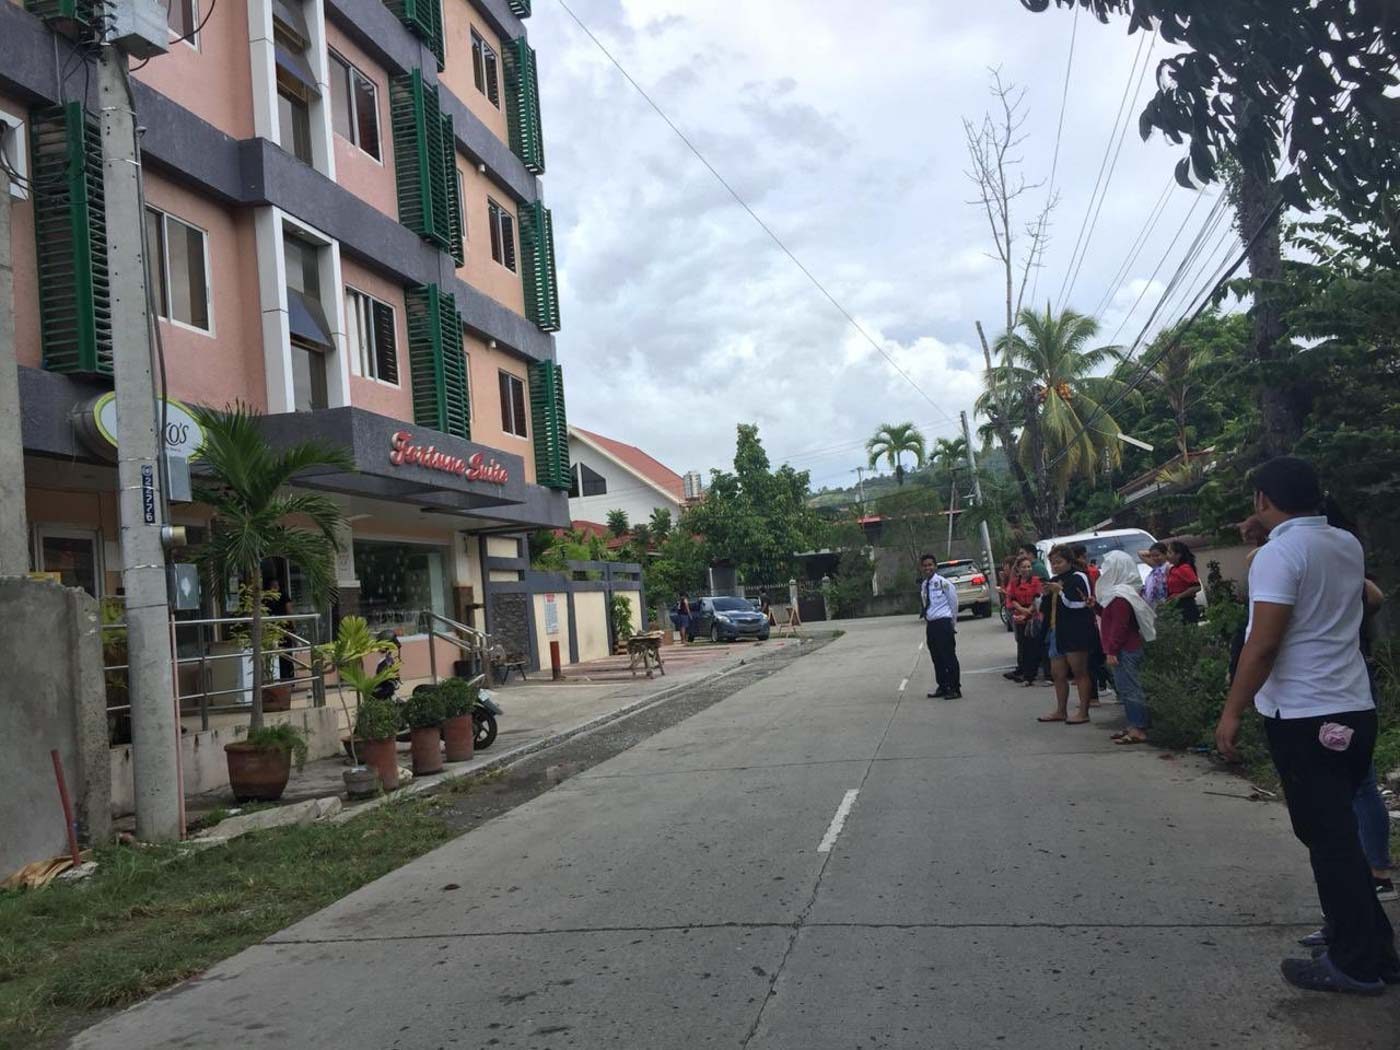 EVACUATION. People including Oxfam staff evacuate a hotel in Iligan City due to the earthquake on December 15, 2019. The Oxfam staff reported a few cracks in the hotel where they are staying. Photo from Miriam Solleza and Jhie Durana/Oxfam Philippines 